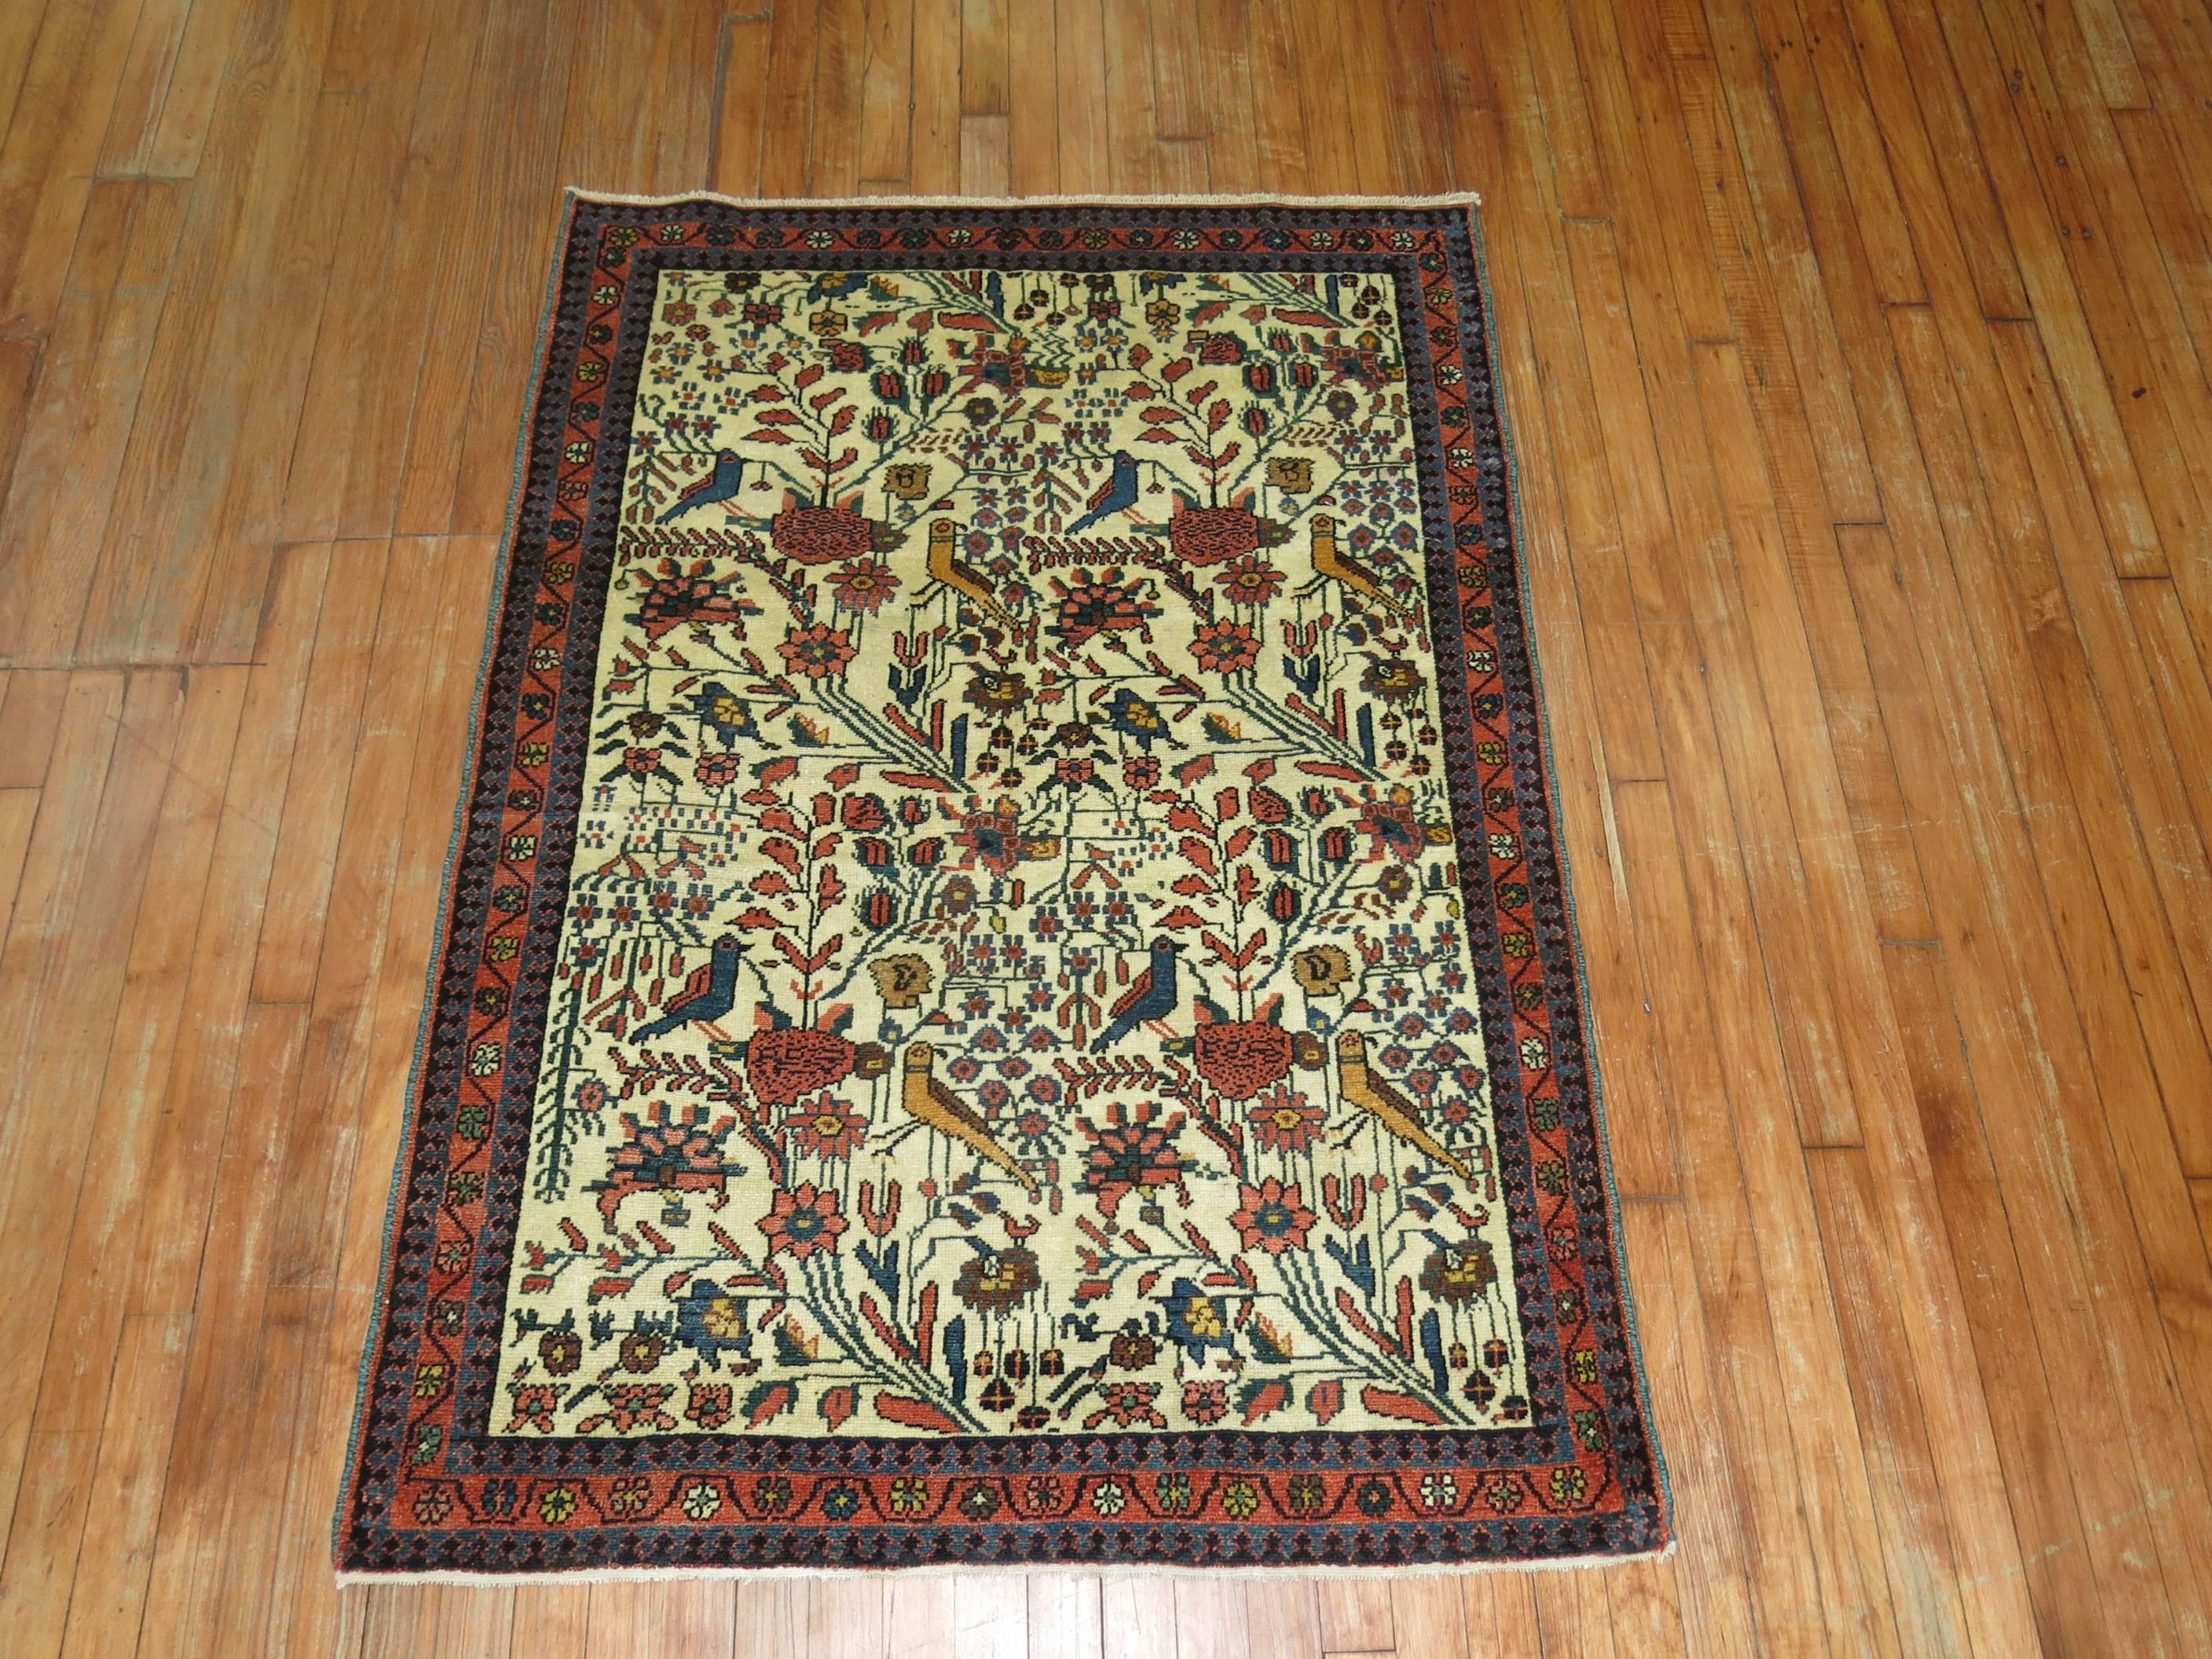 One-of-a-kind 20th-century decorative Northwest Persian Pictorial Pigeon rug.

3'6